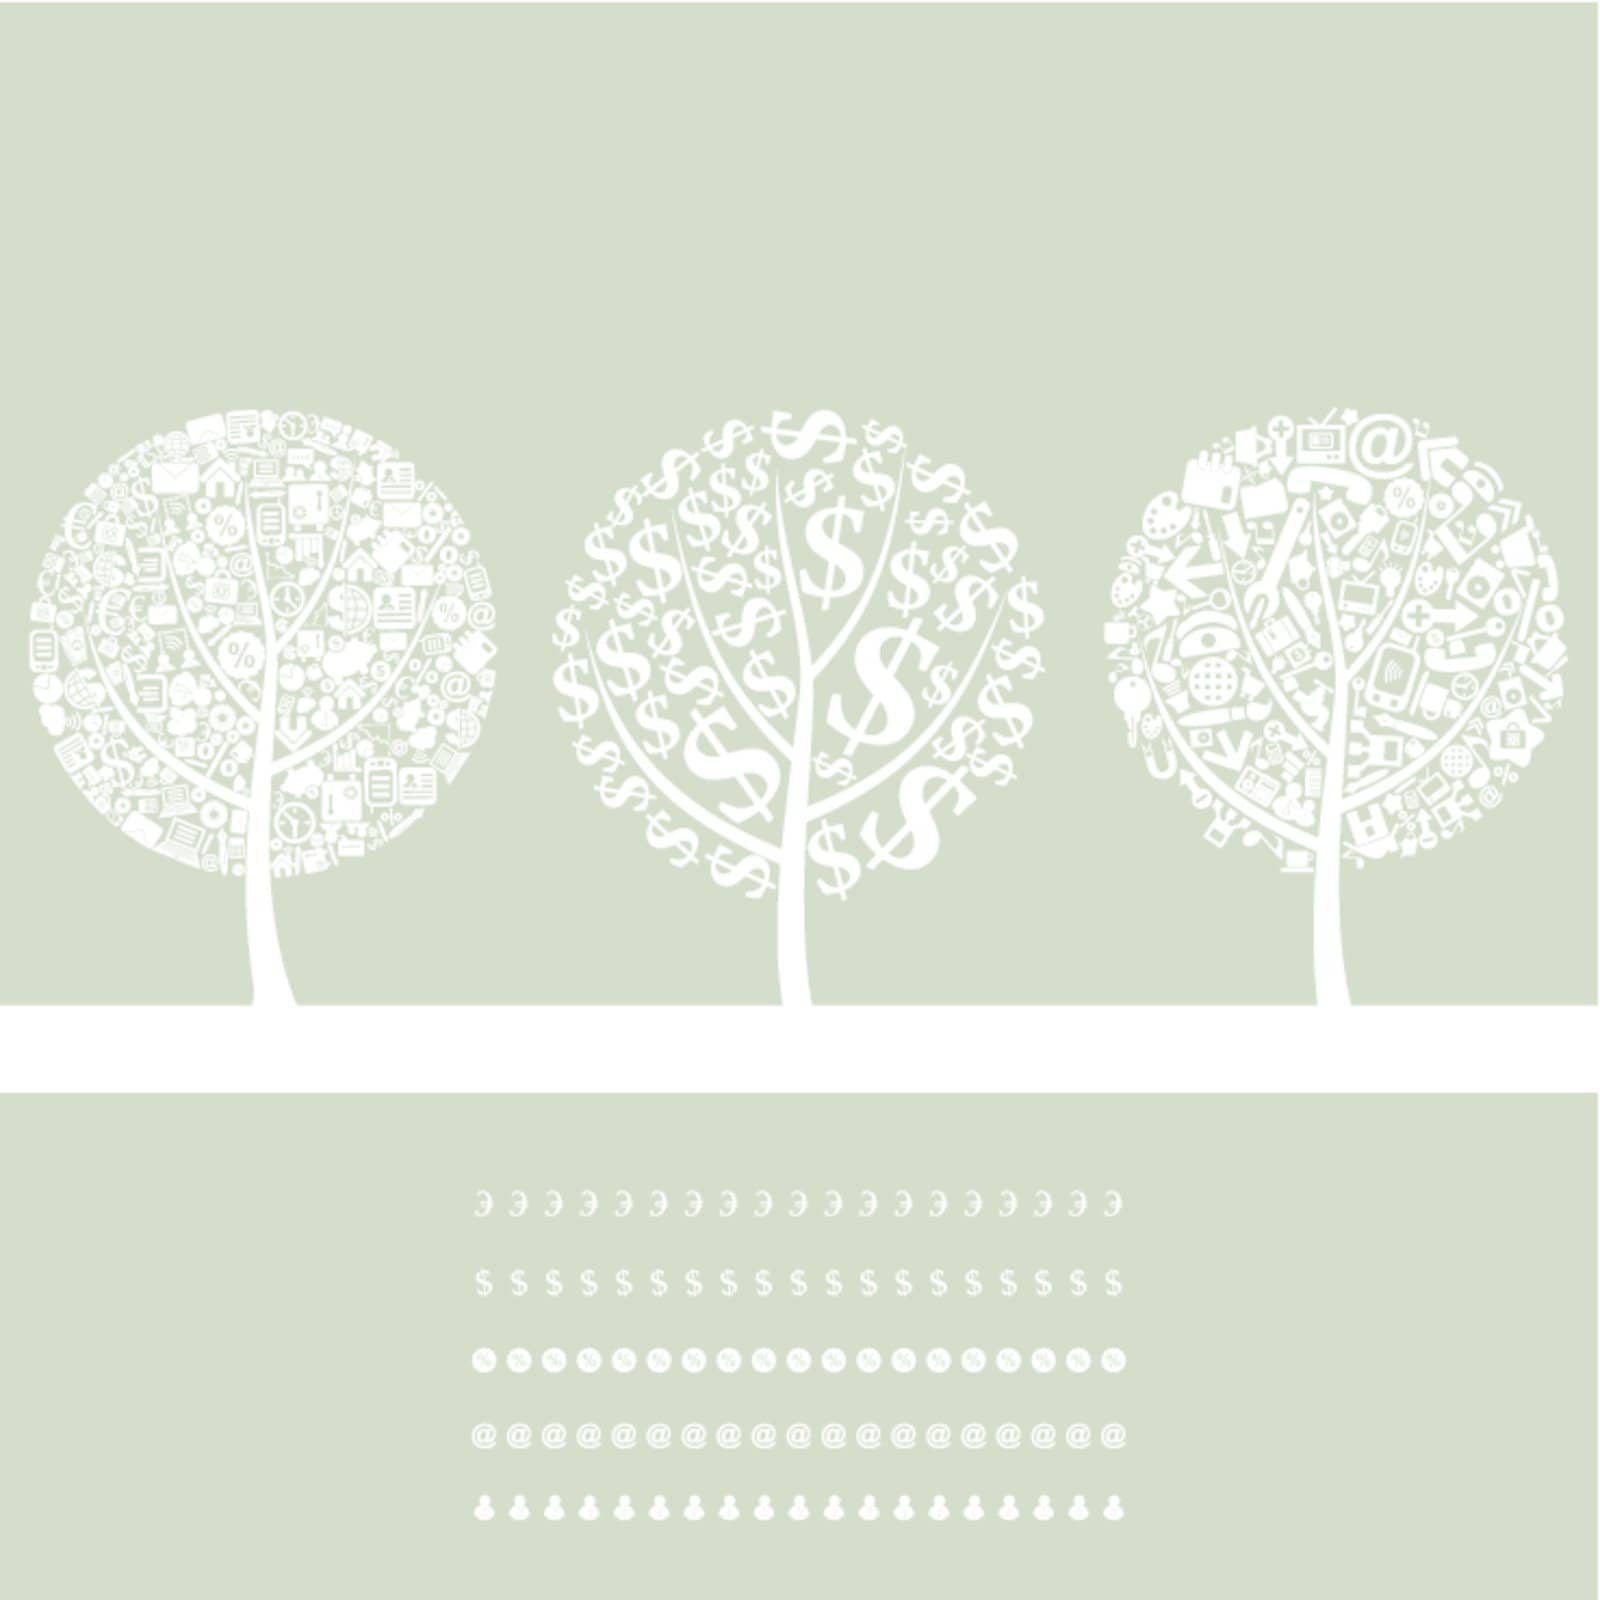 Three trees on a theme business. A vector illustration